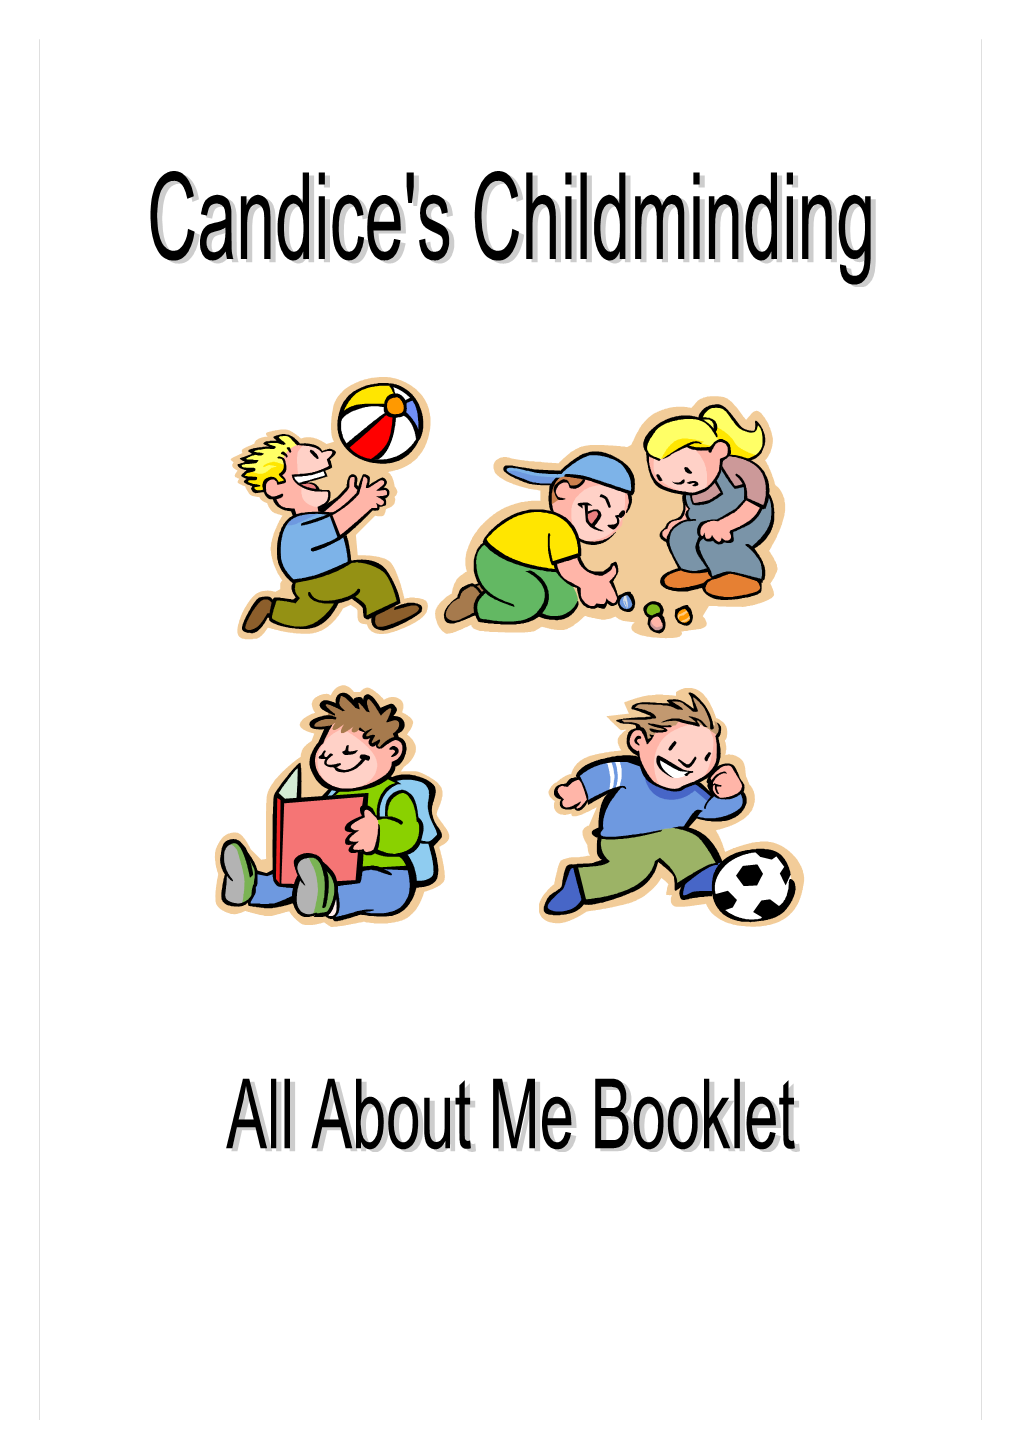 Childminders and Childrens Learning Development Booklet - 24.10.11